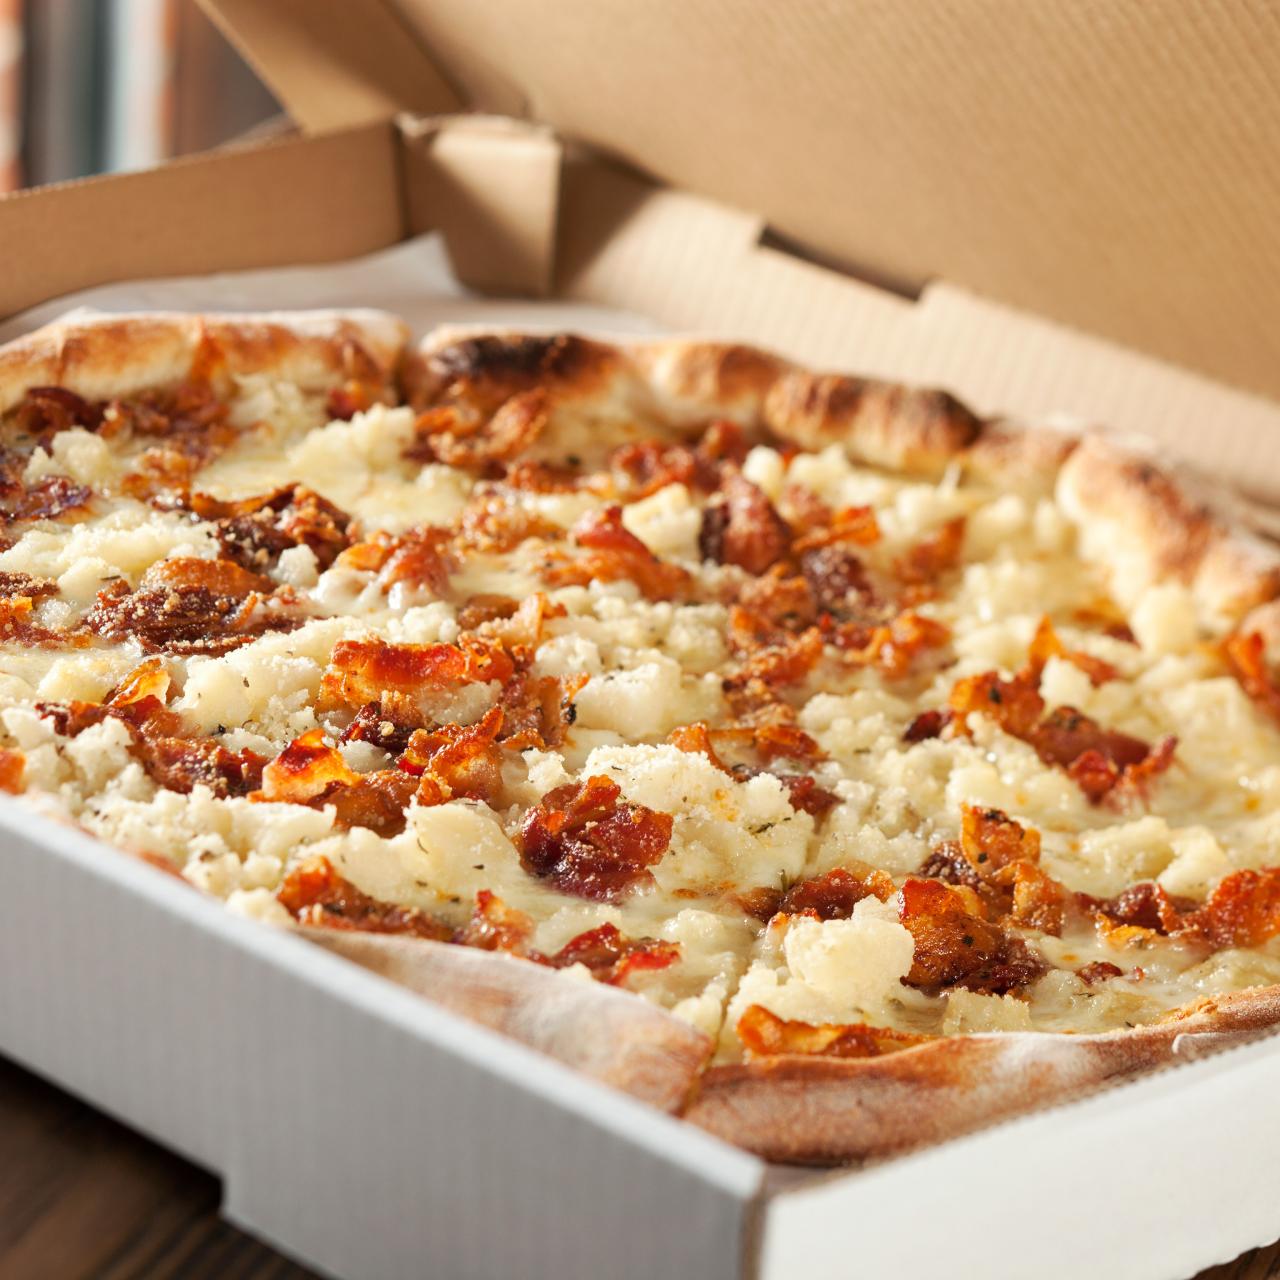 12 Reasons To Order Pizza Delivery Today